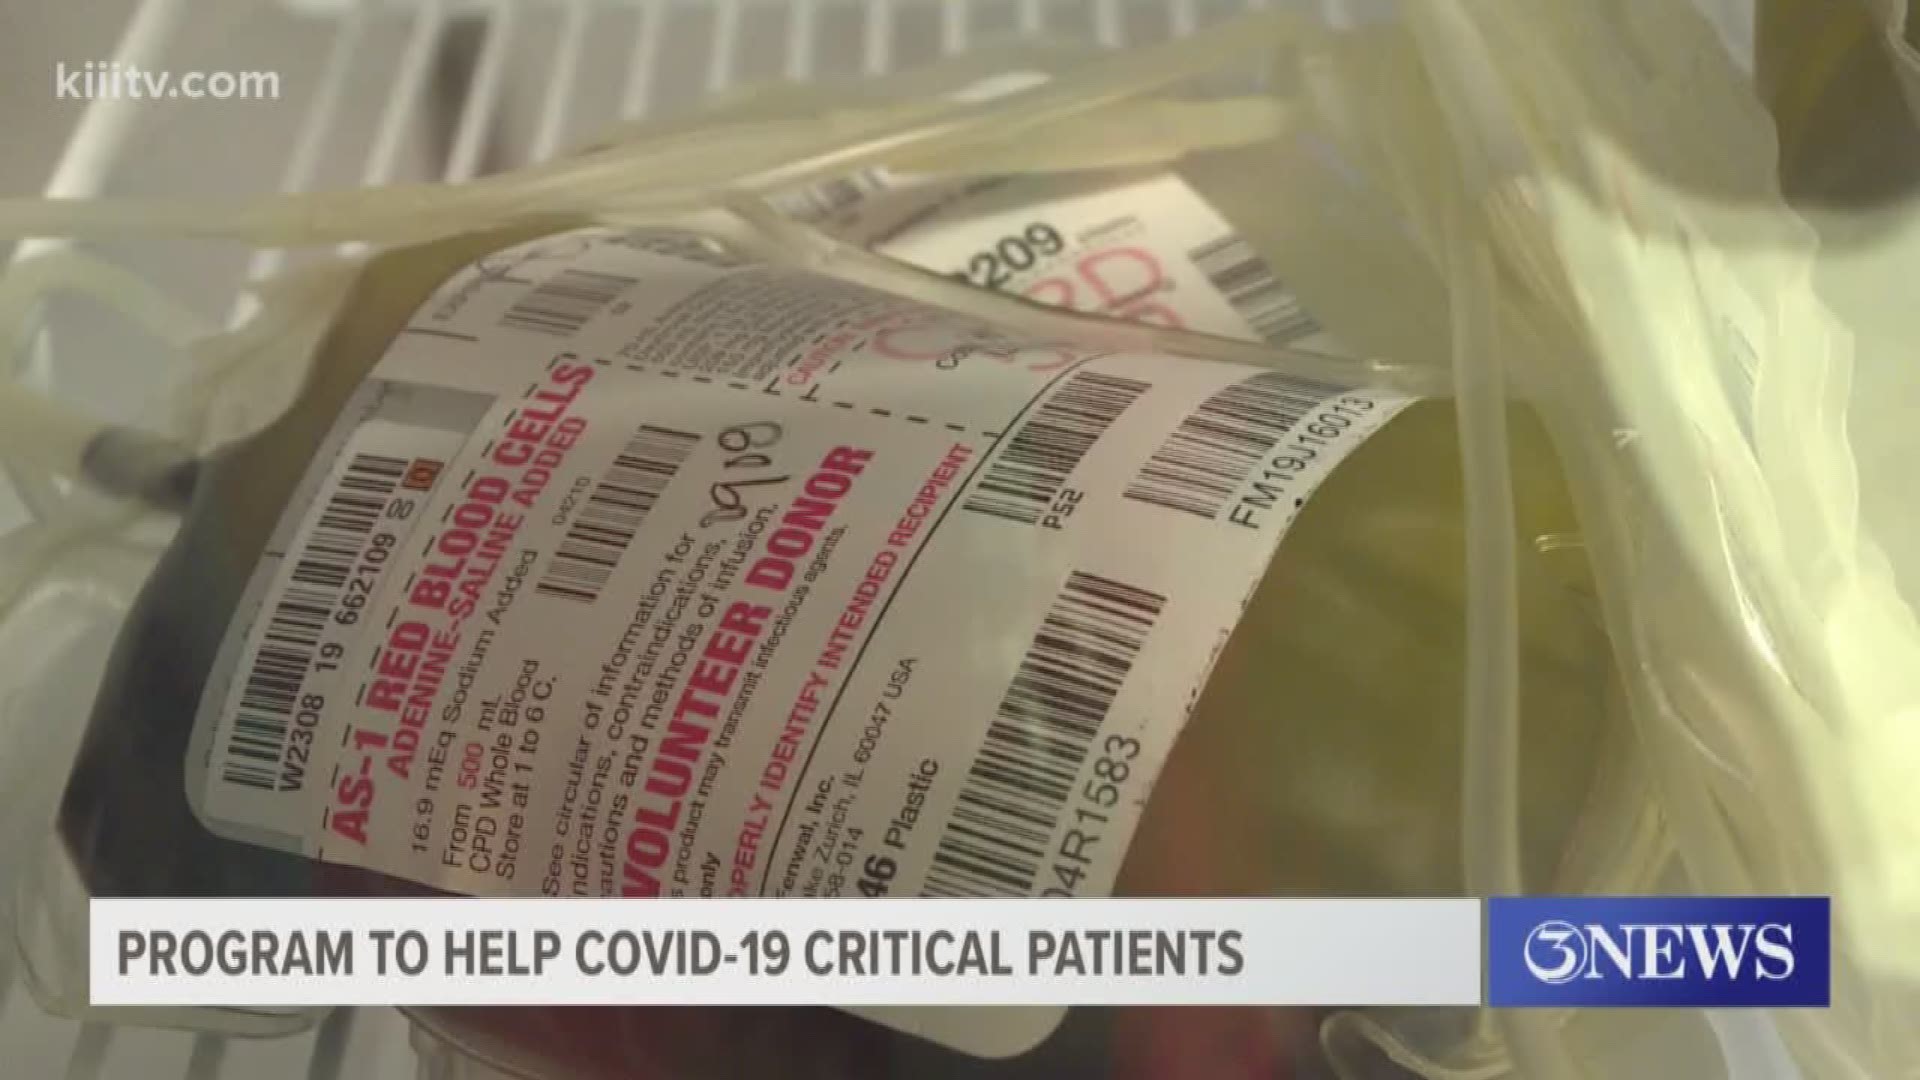 Nueces County Health Department is asking COVID-19 patients to become a part of the program once they recover from the disease.